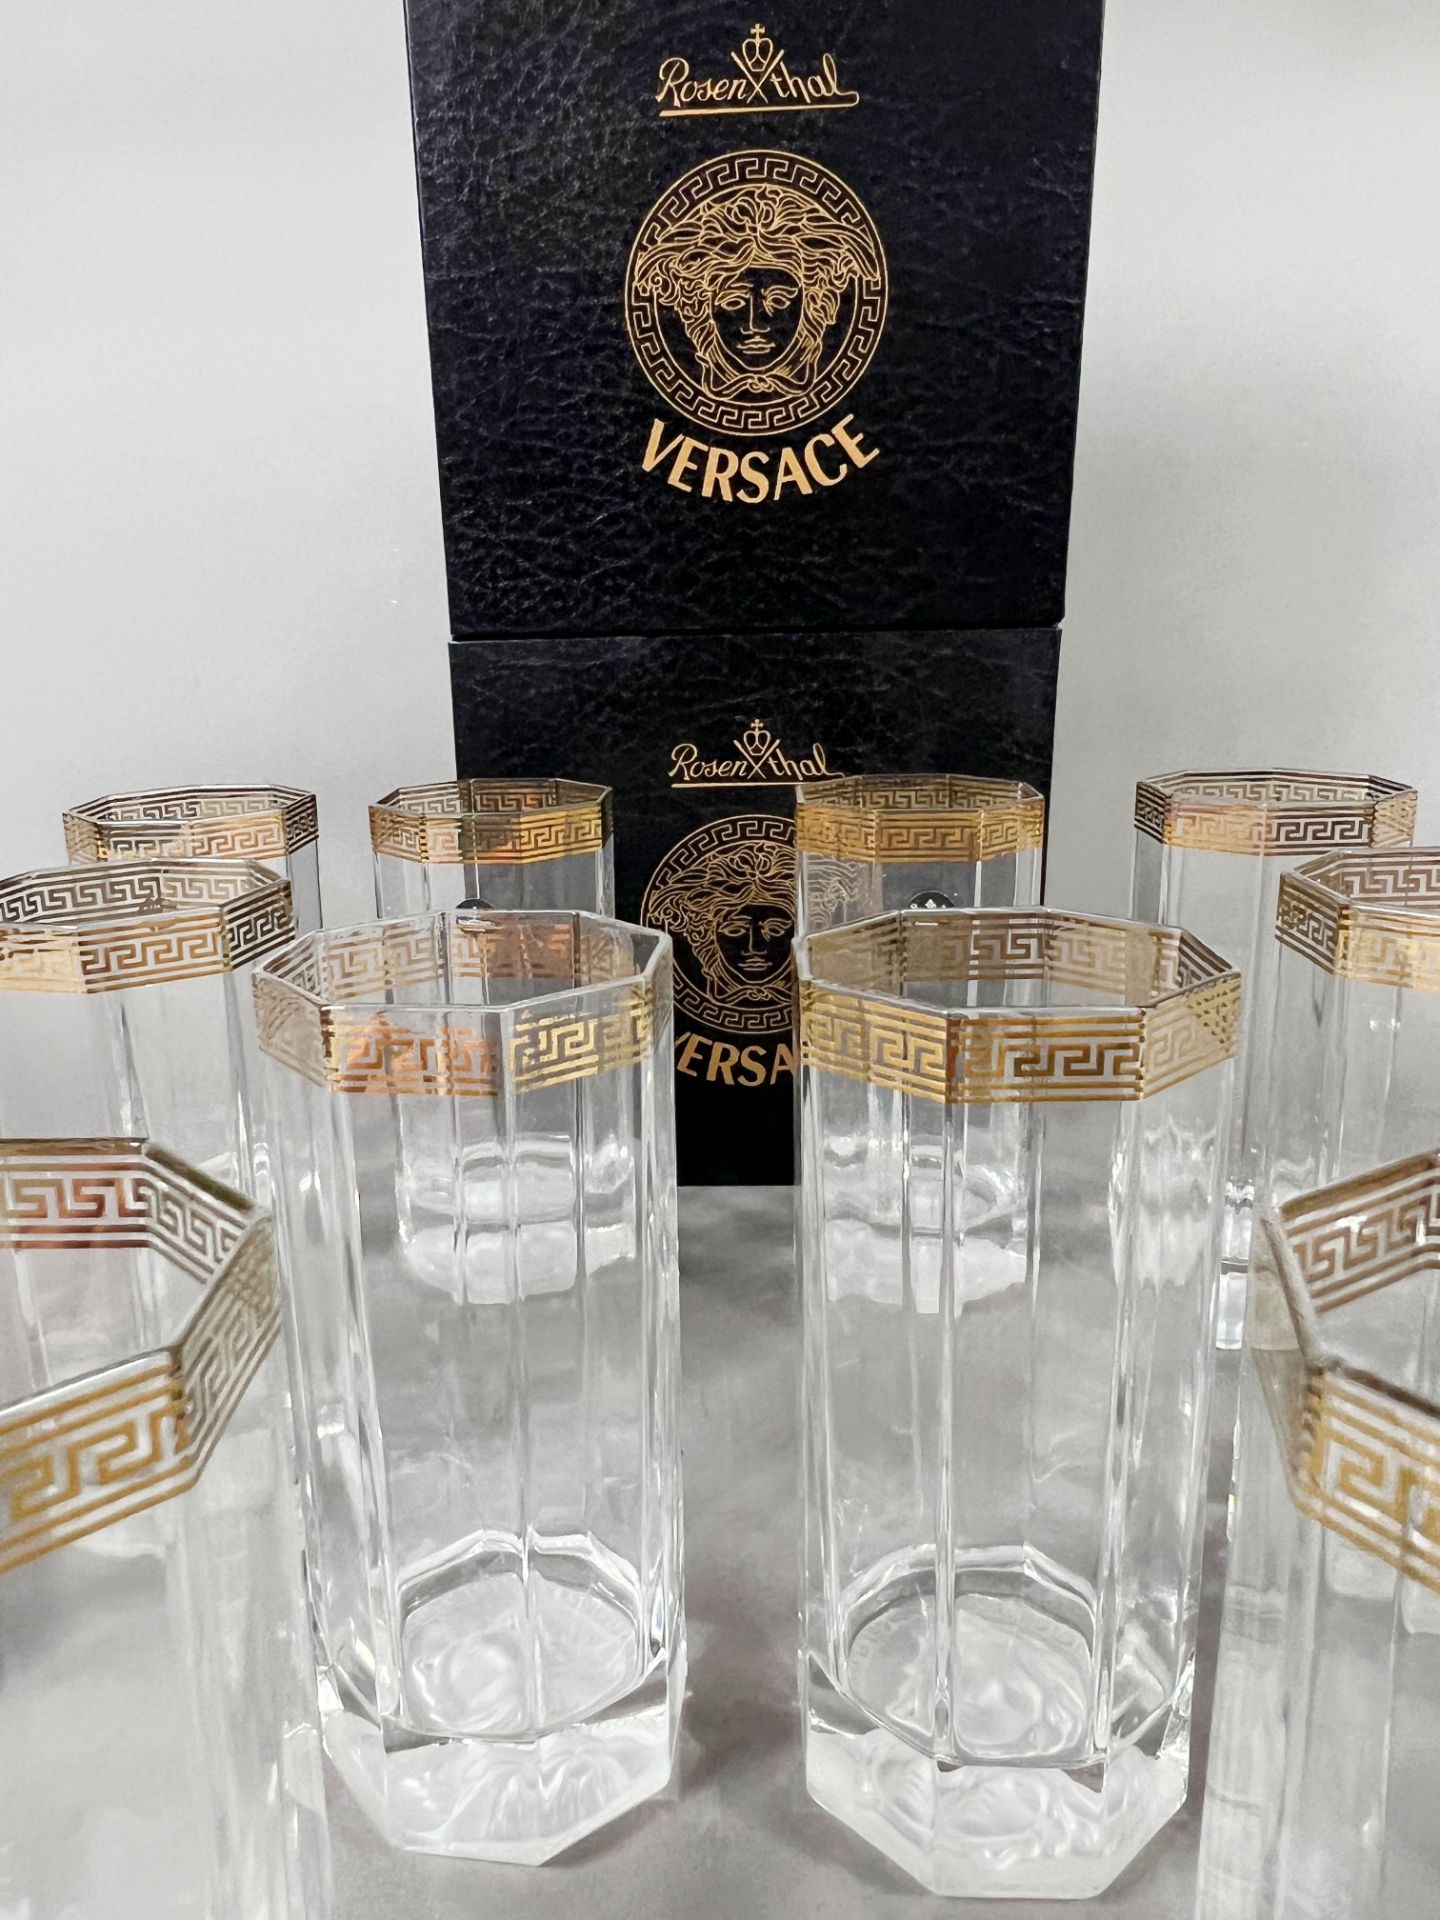 VERSACE by ROSENTHAL. "Medusa D'Or". 12-piece set of long drink glasses. - Image 4 of 7